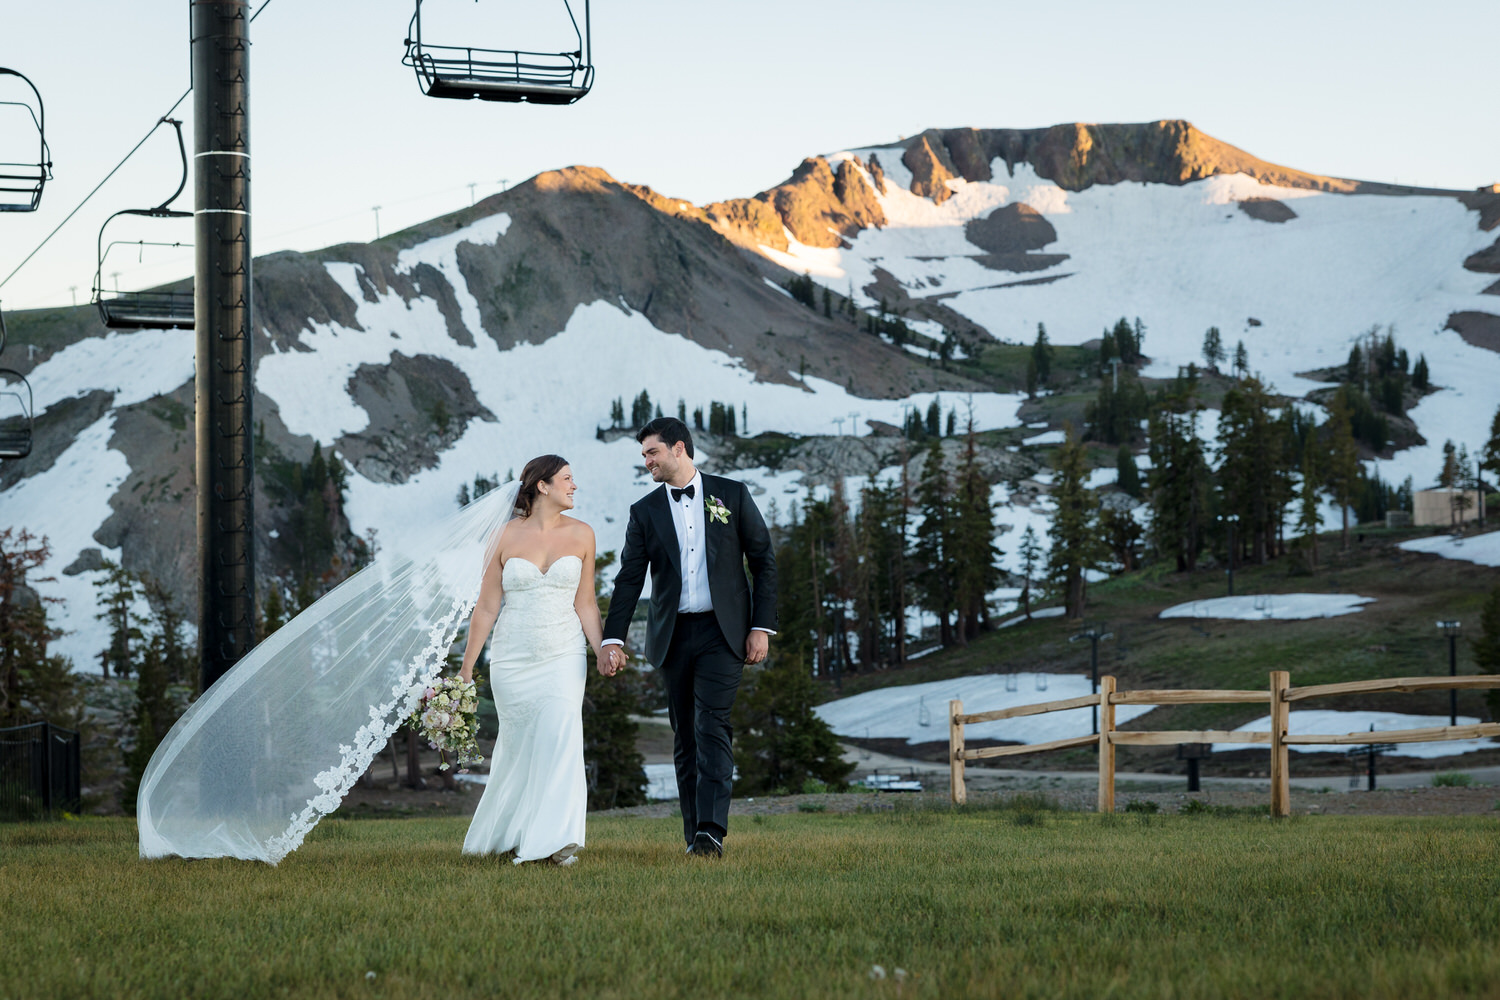 A bride and groom that decided to get married at High Camp take a sunset walk with the Palisades in the background.